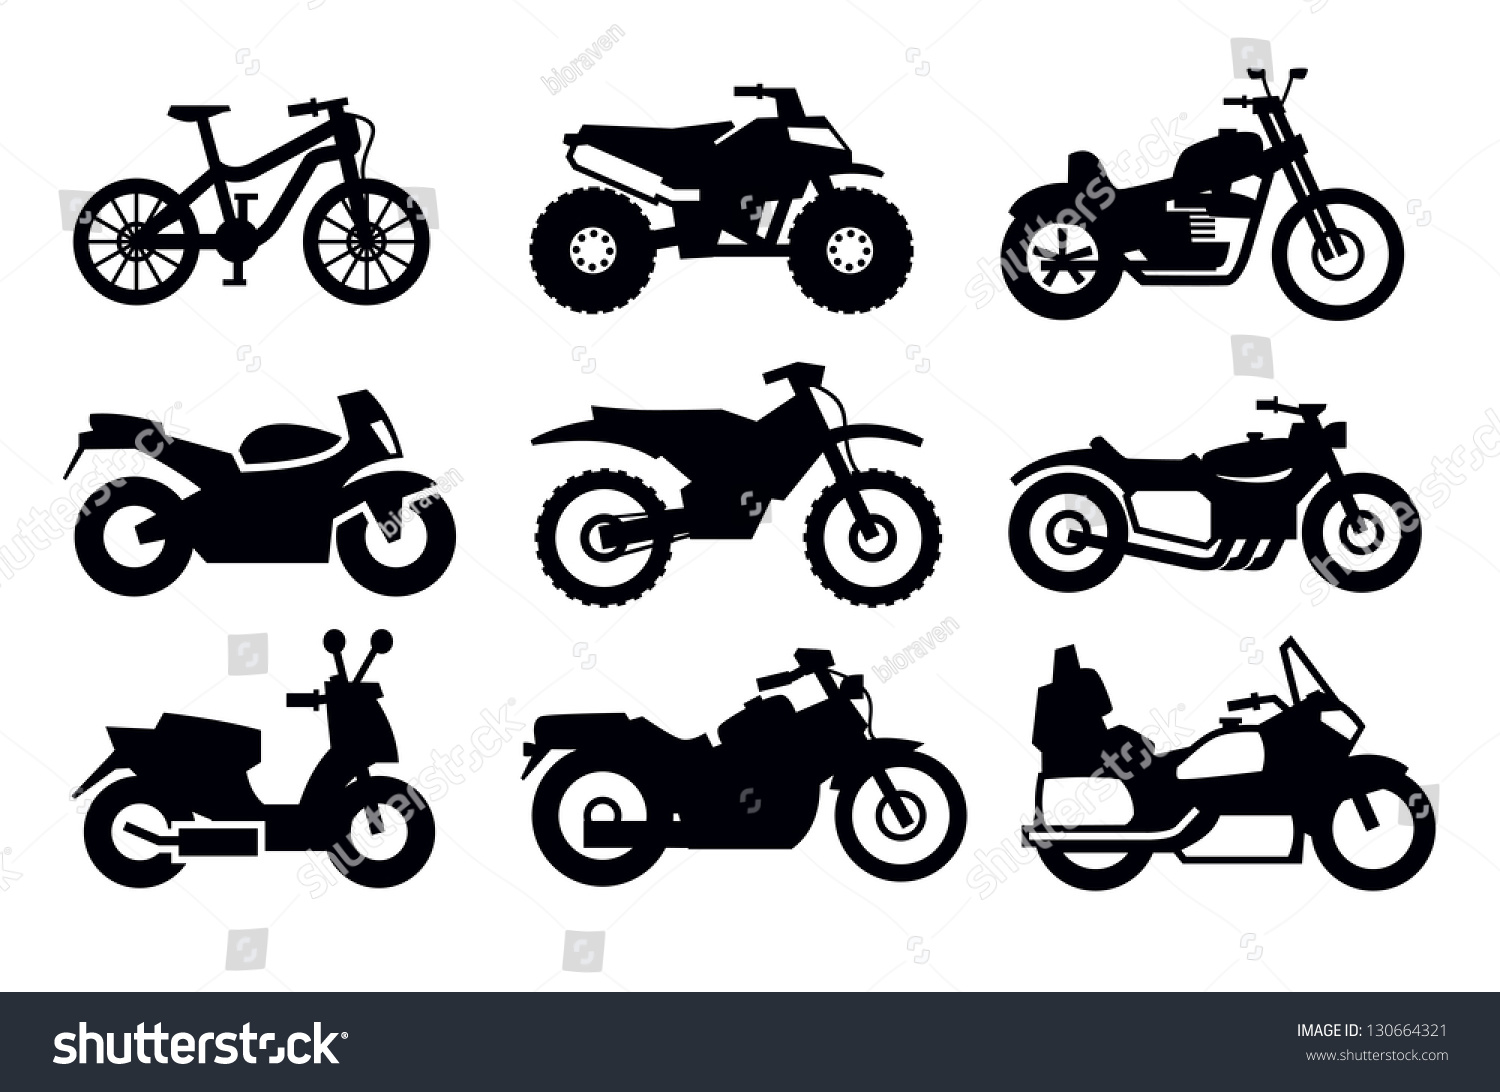 vector free download motorcycle - photo #14